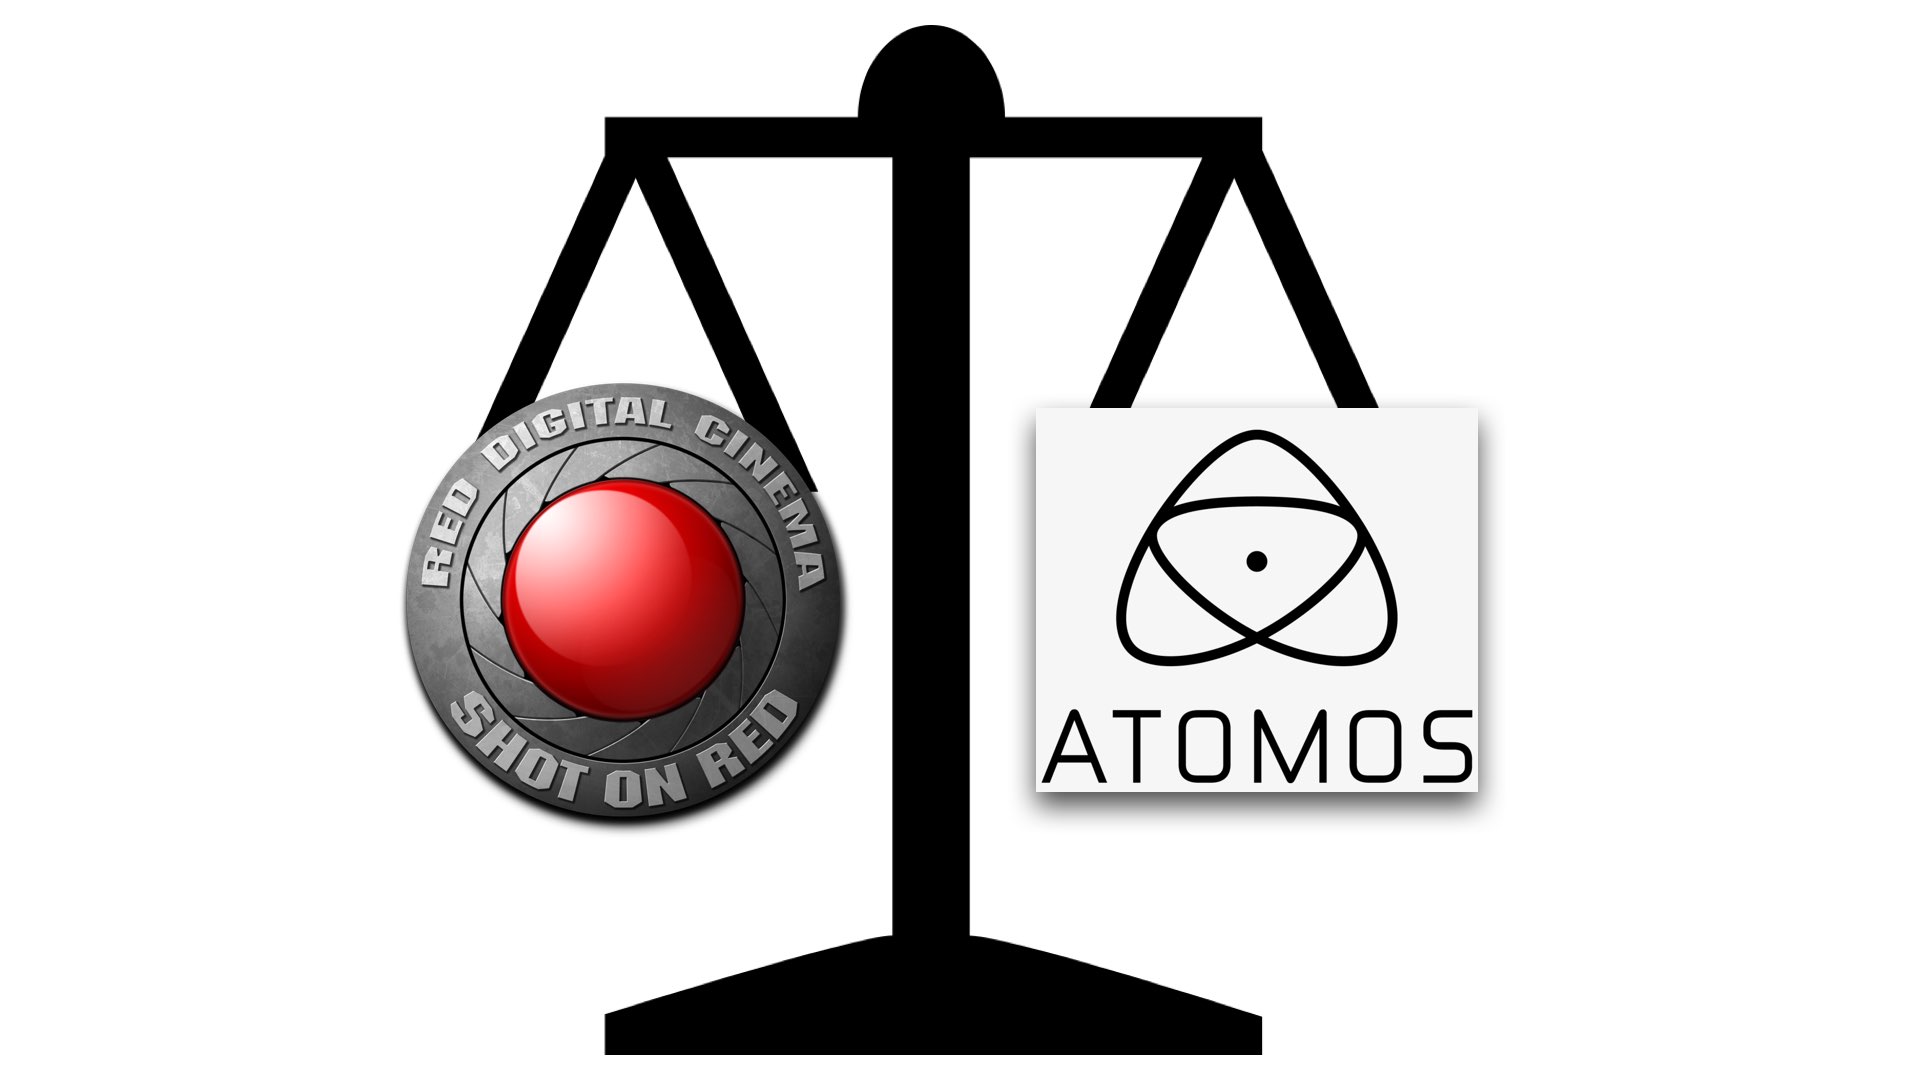 RED & Atomos: Partnership and patent infringement